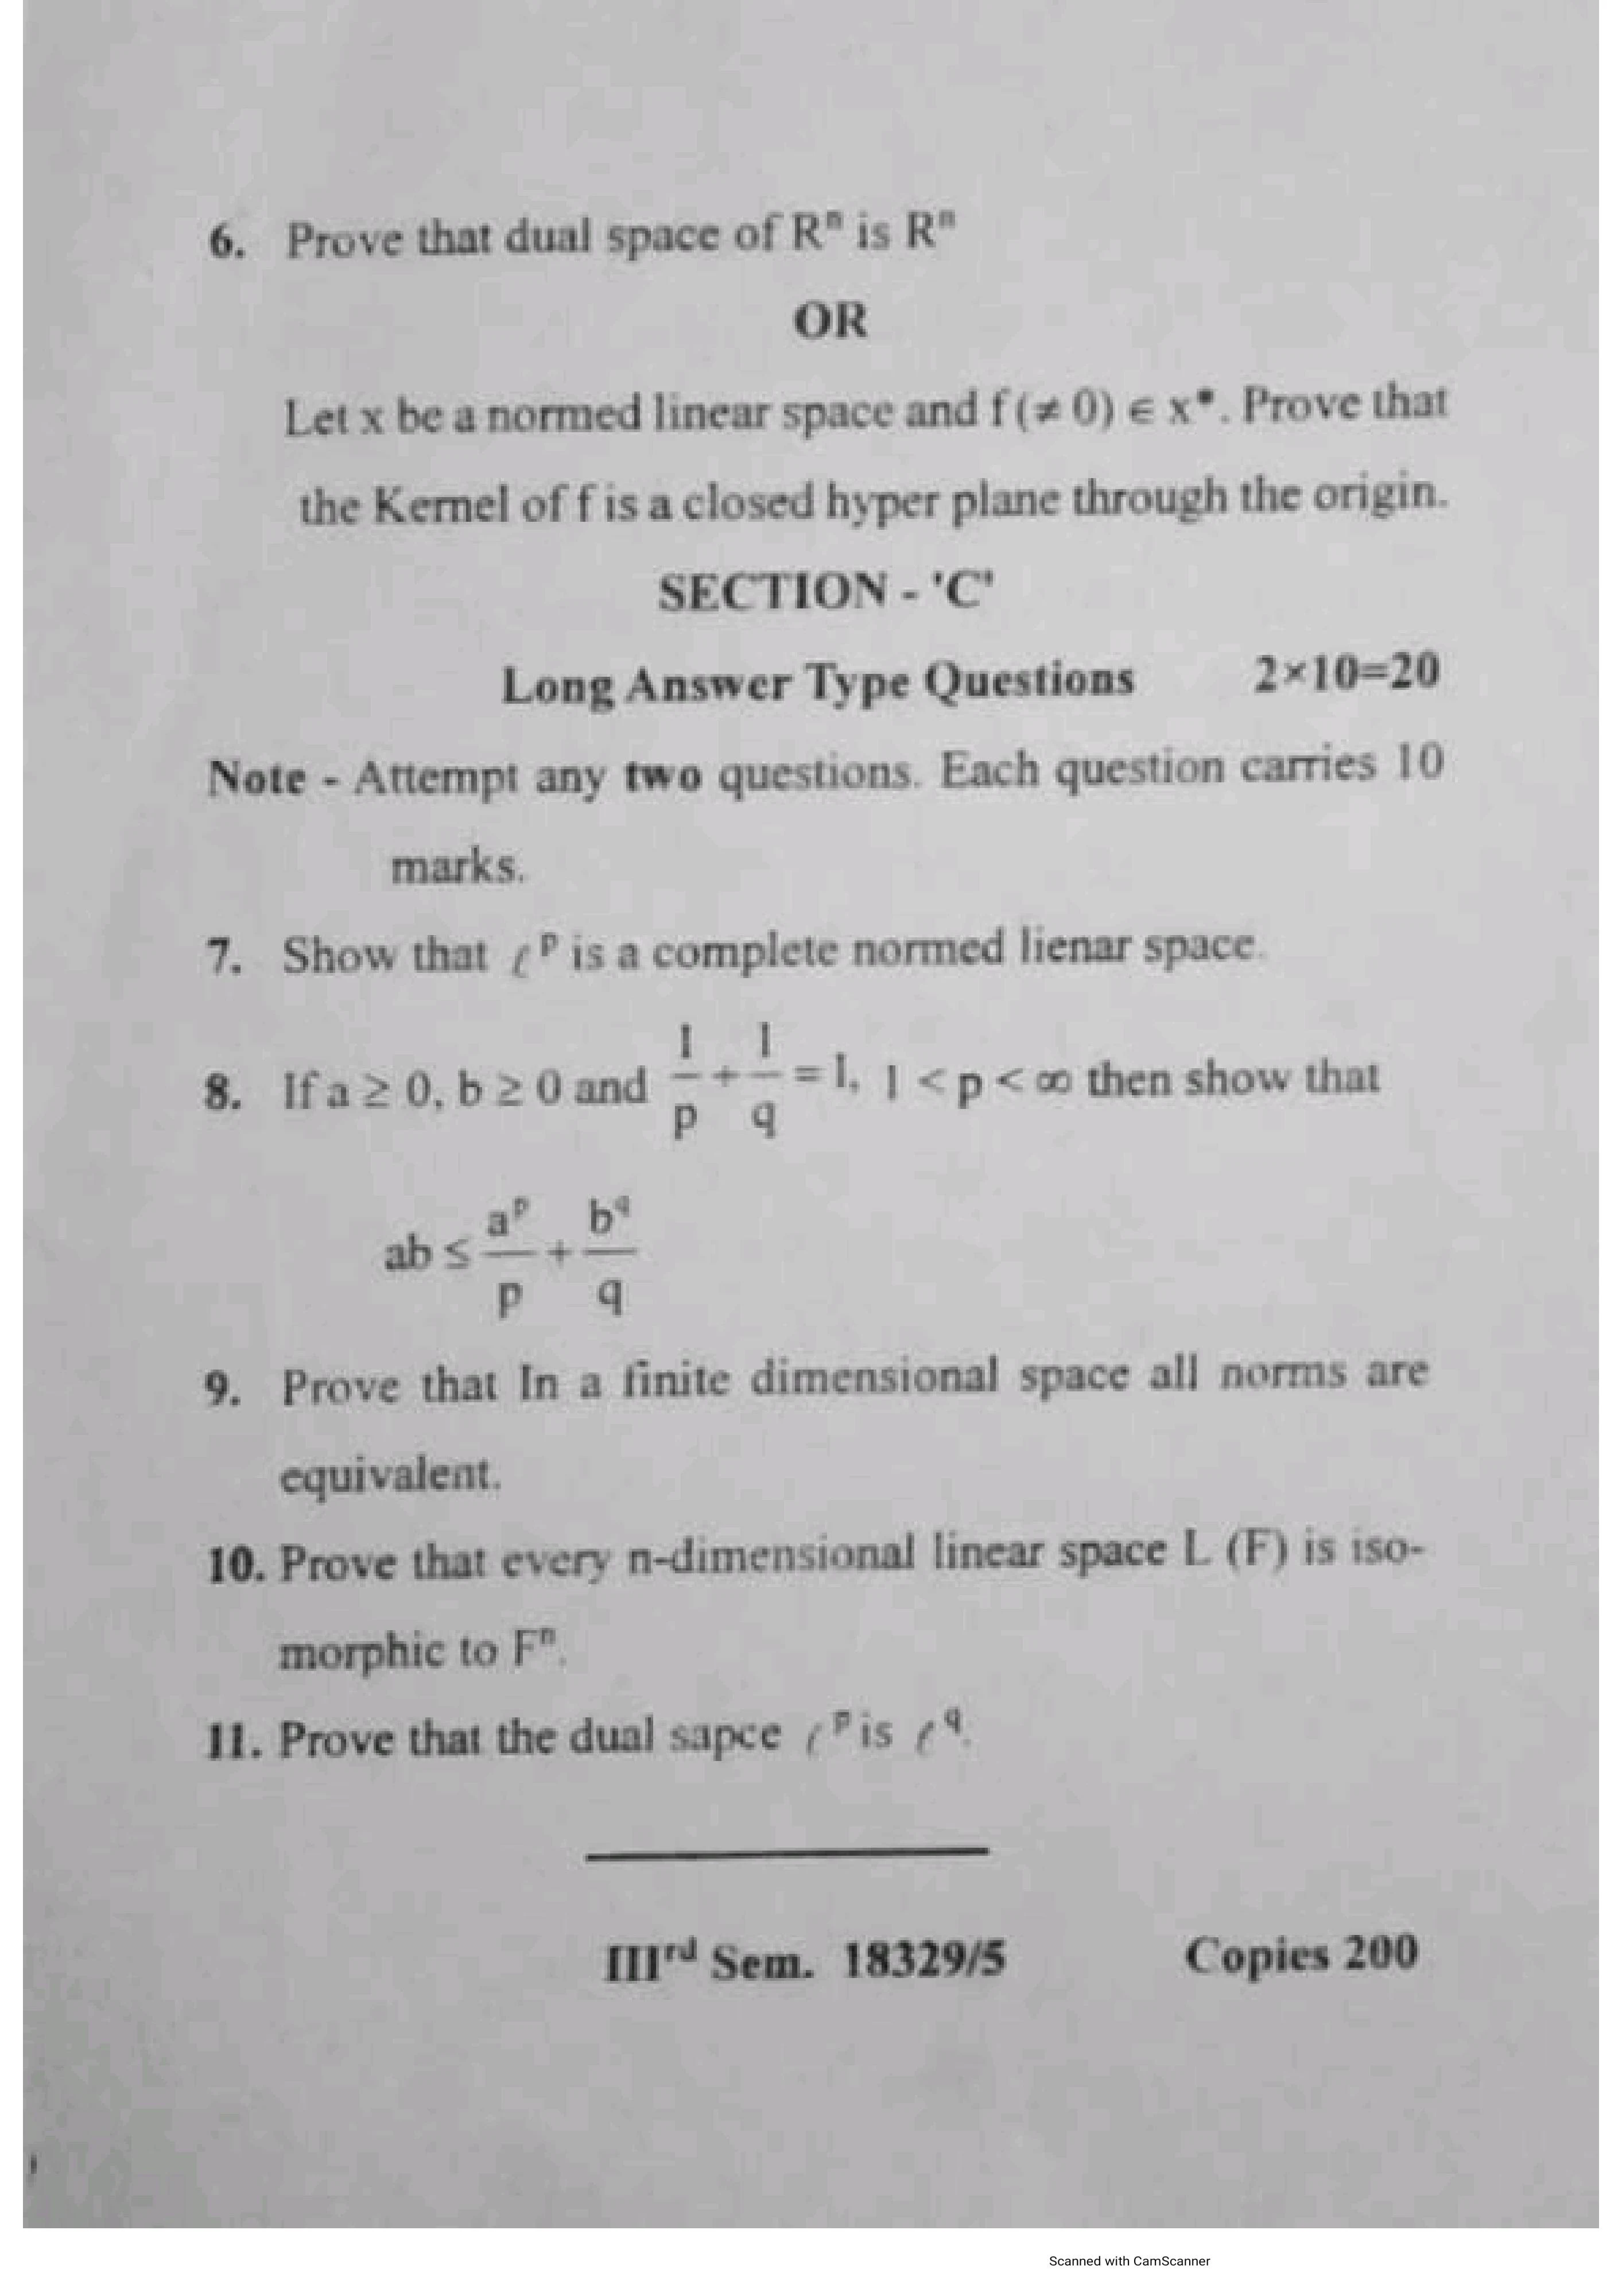 Mathematics M.Sc - IIIrd Sem Previous Question Papers Subject - Functional Anaysis